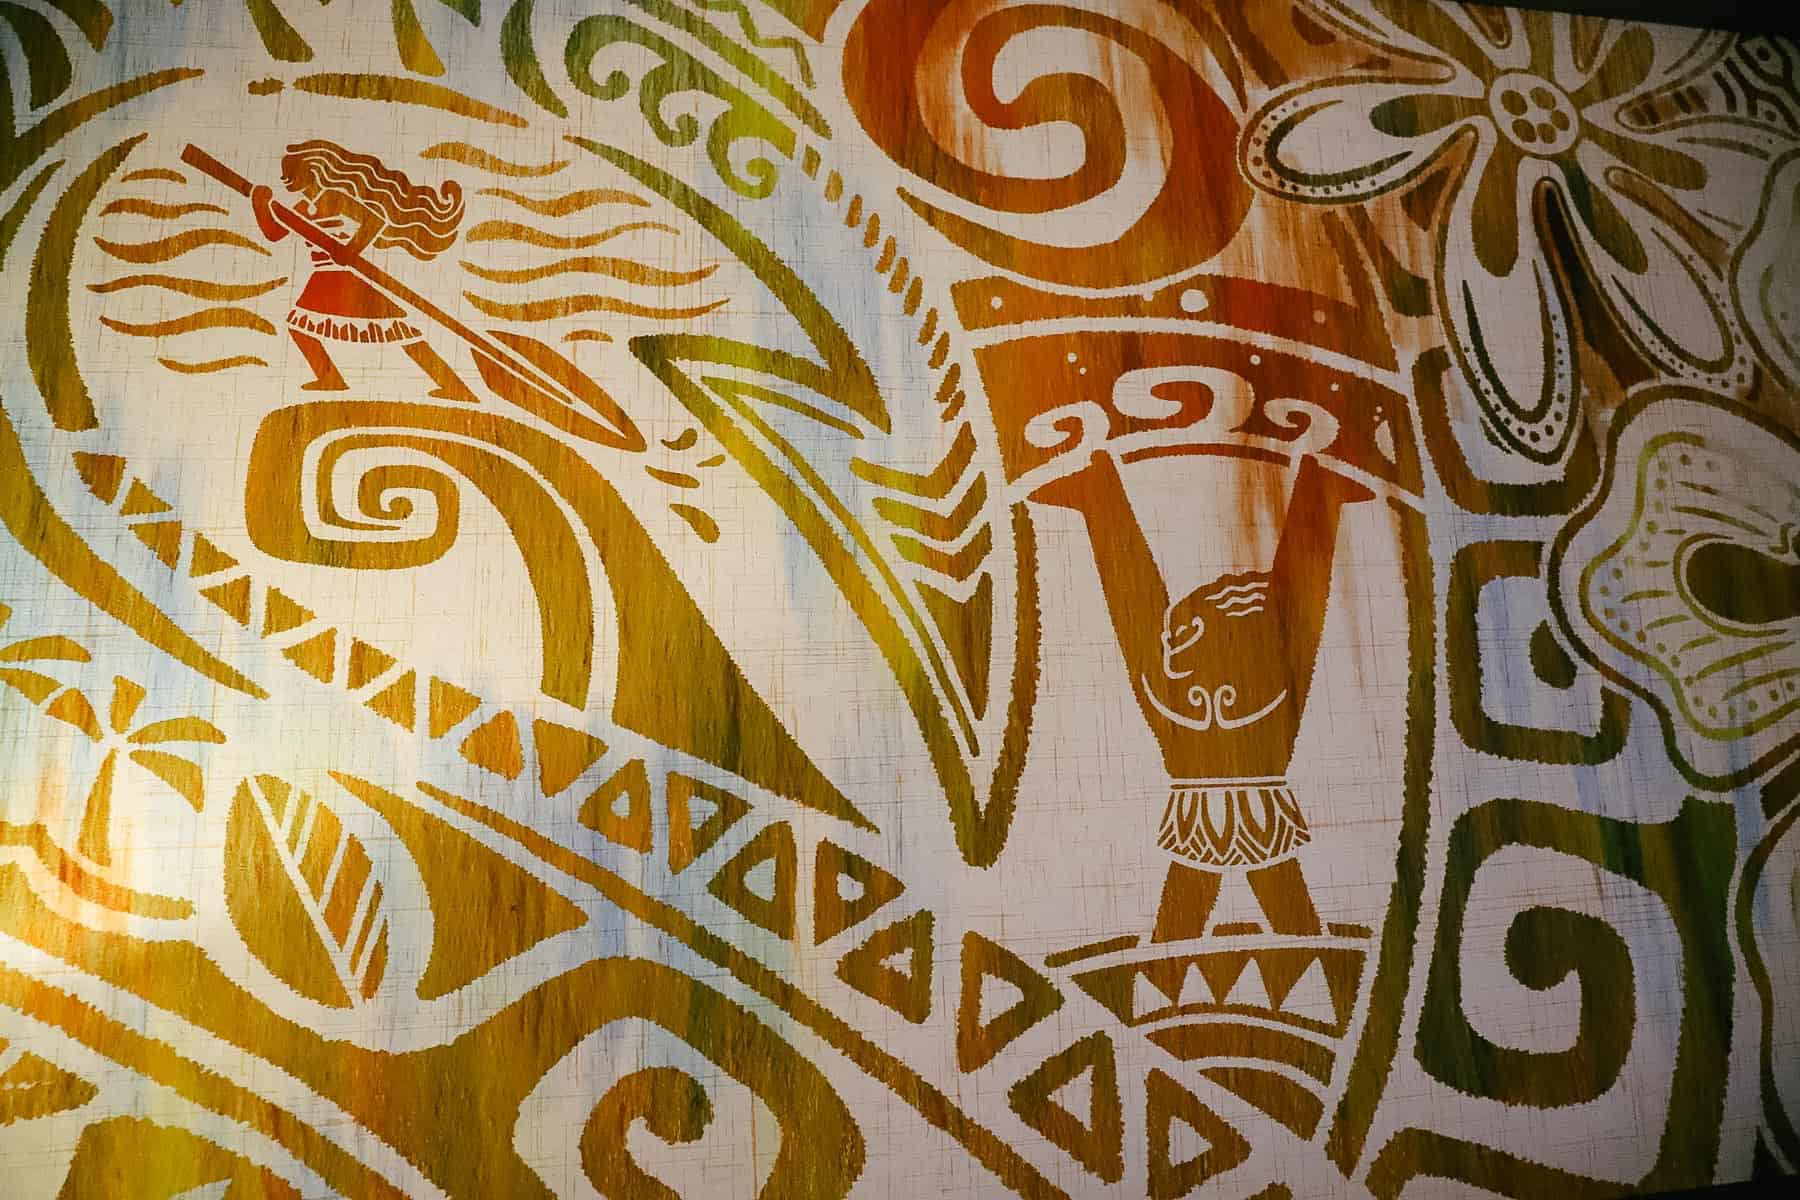 Moana and Maui features on the wallpaper. 